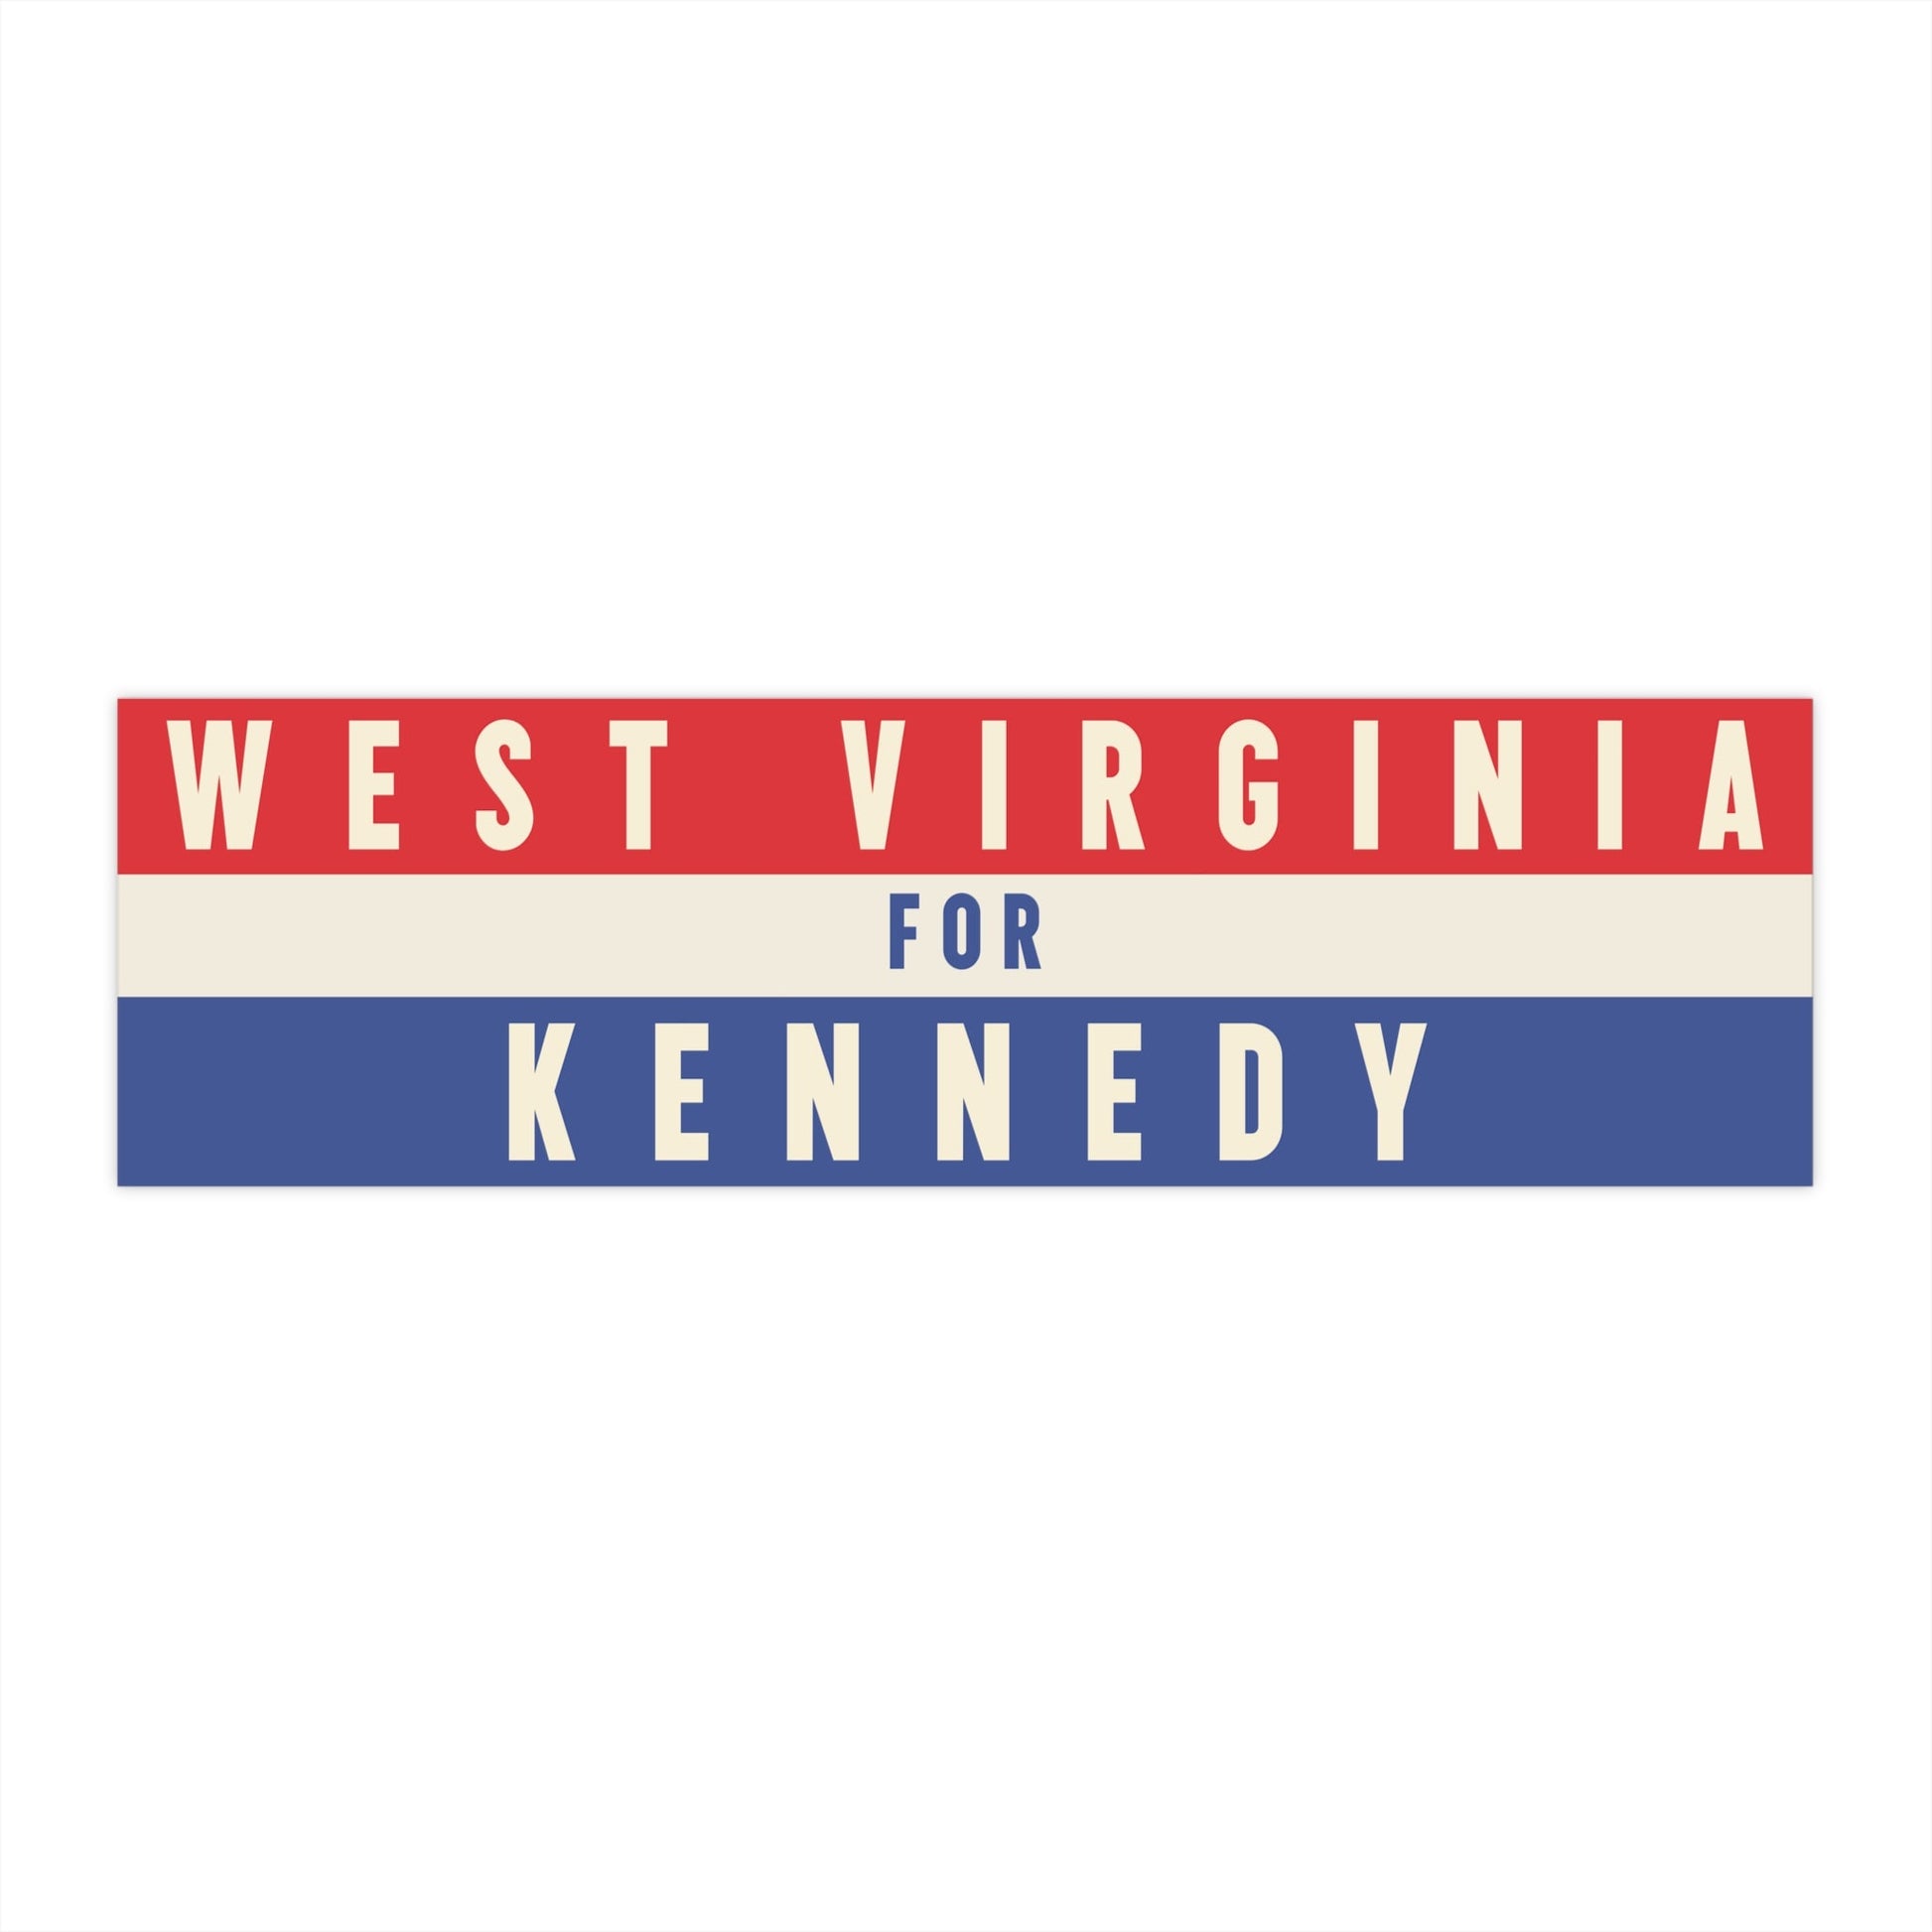 West Virginia for Kennedy Bumper Sticker - TEAM KENNEDY. All rights reserved